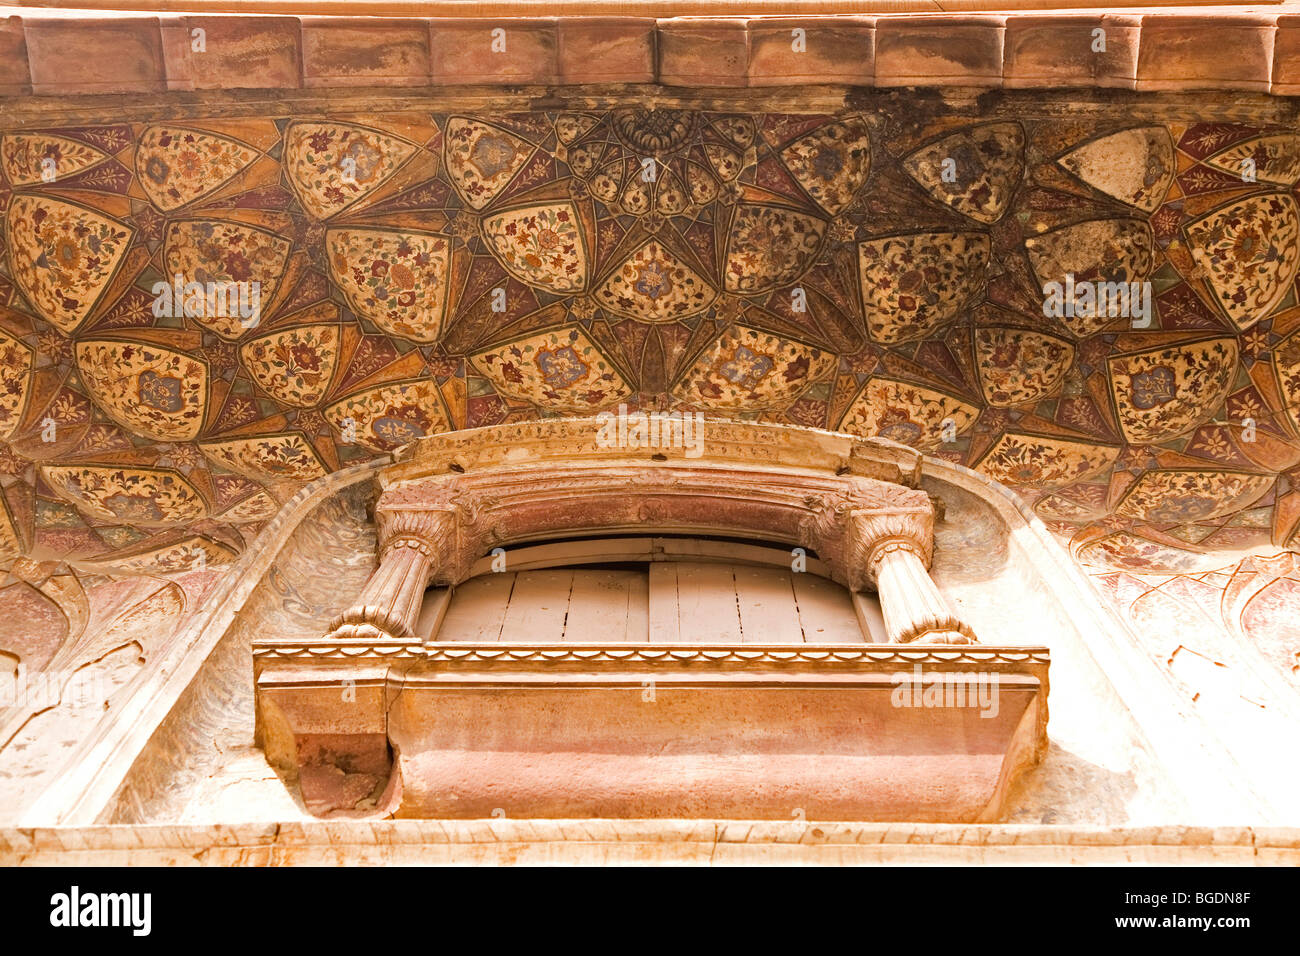 A detail from the ceiling of an Iwan on Safdarjung's Tomb in Delhi, India. Stock Photo